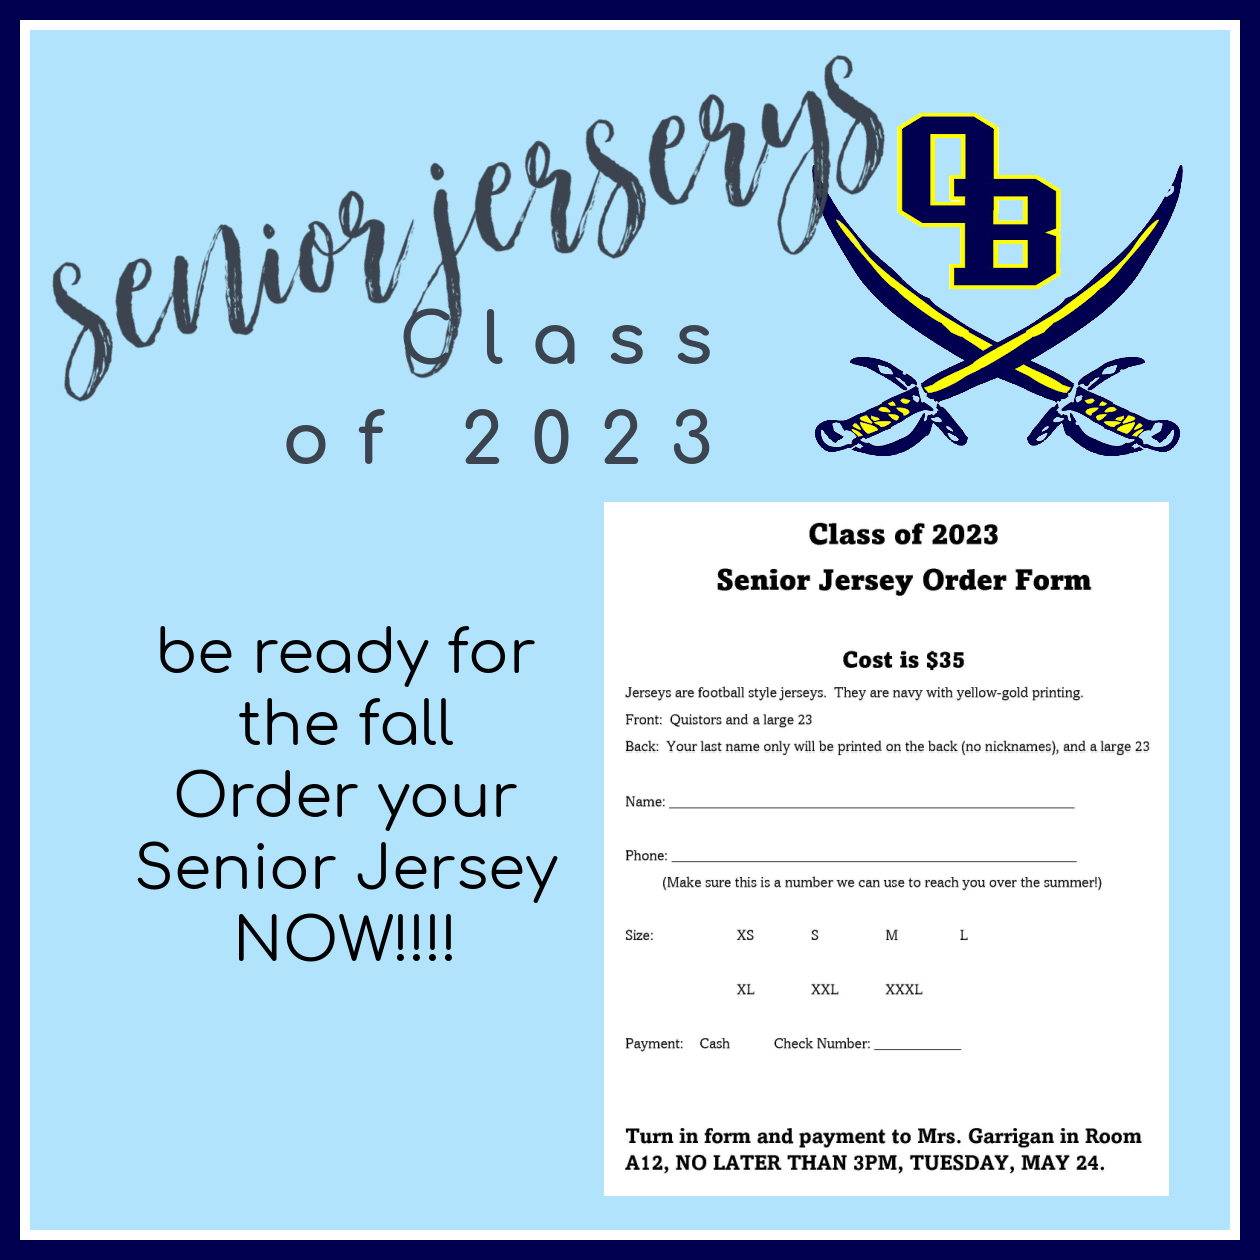 Class of 2023 Jersey Orders